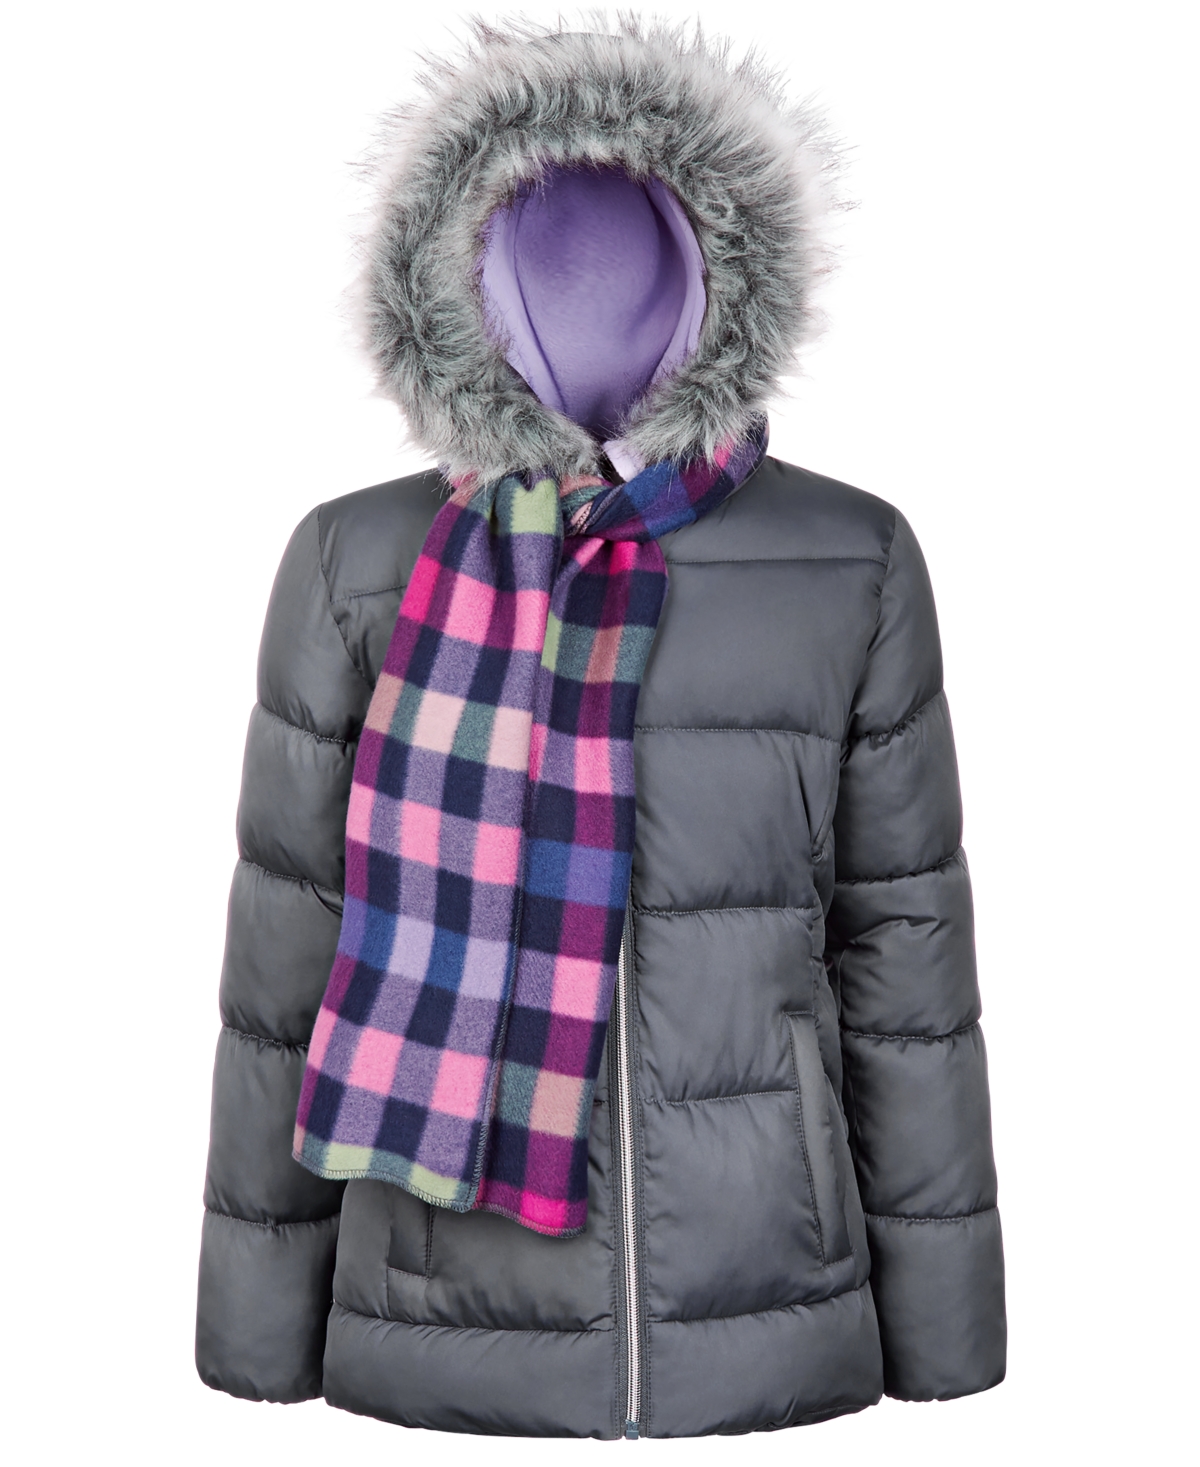 S ROTHSCHILD & CO BIG GIRLS SOLID QUILT PUFFER COAT & PLAID SCARF